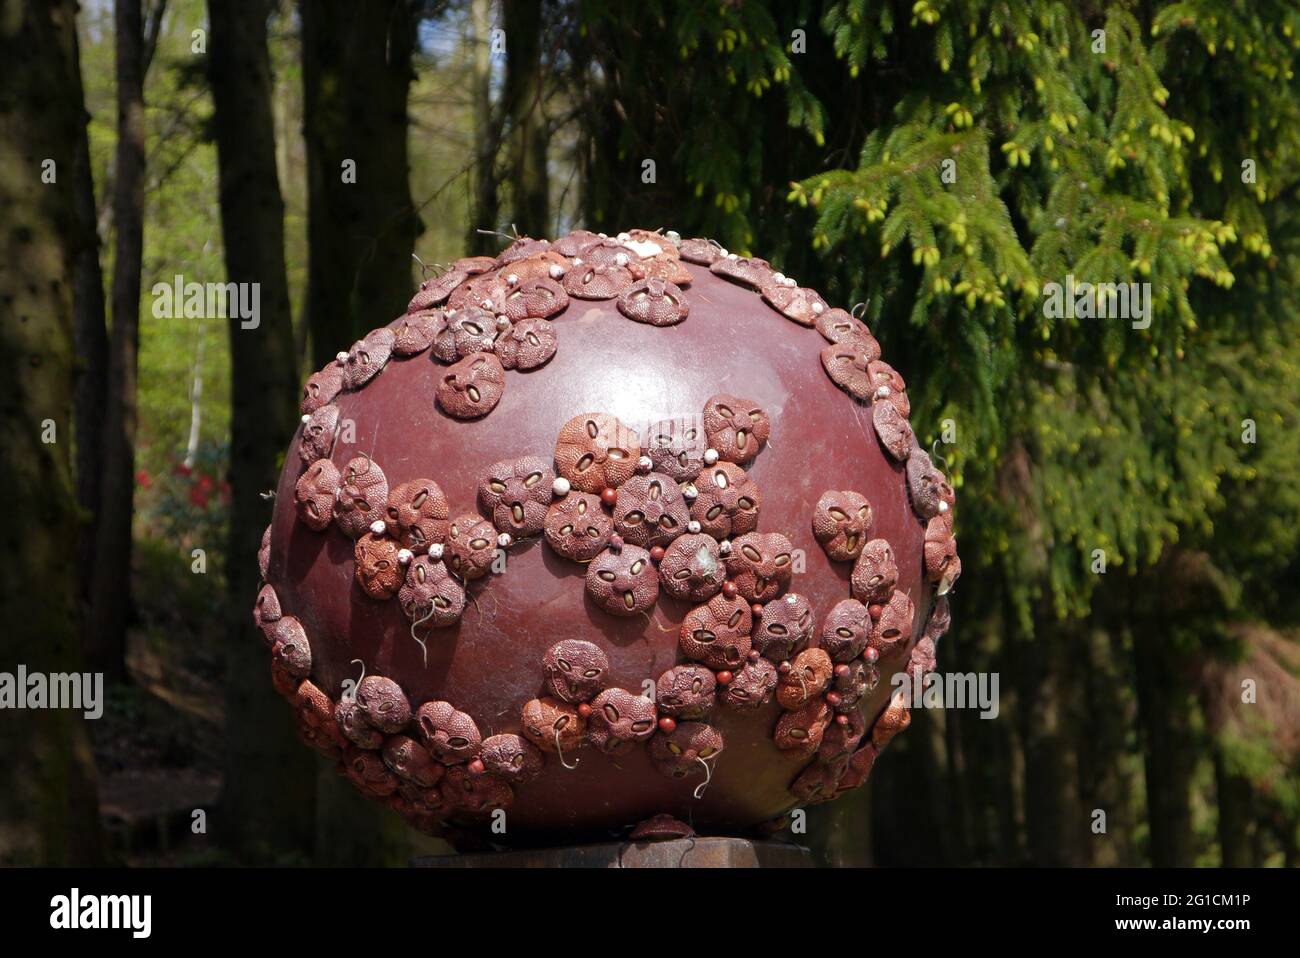 Balls with Giant Clay Pollen Grains 'Rhodi Torana' on Display at the Himalayan Garden & Sculpture Park, Grewelthorpe, Ripon, North Yorkshire Stock Photo